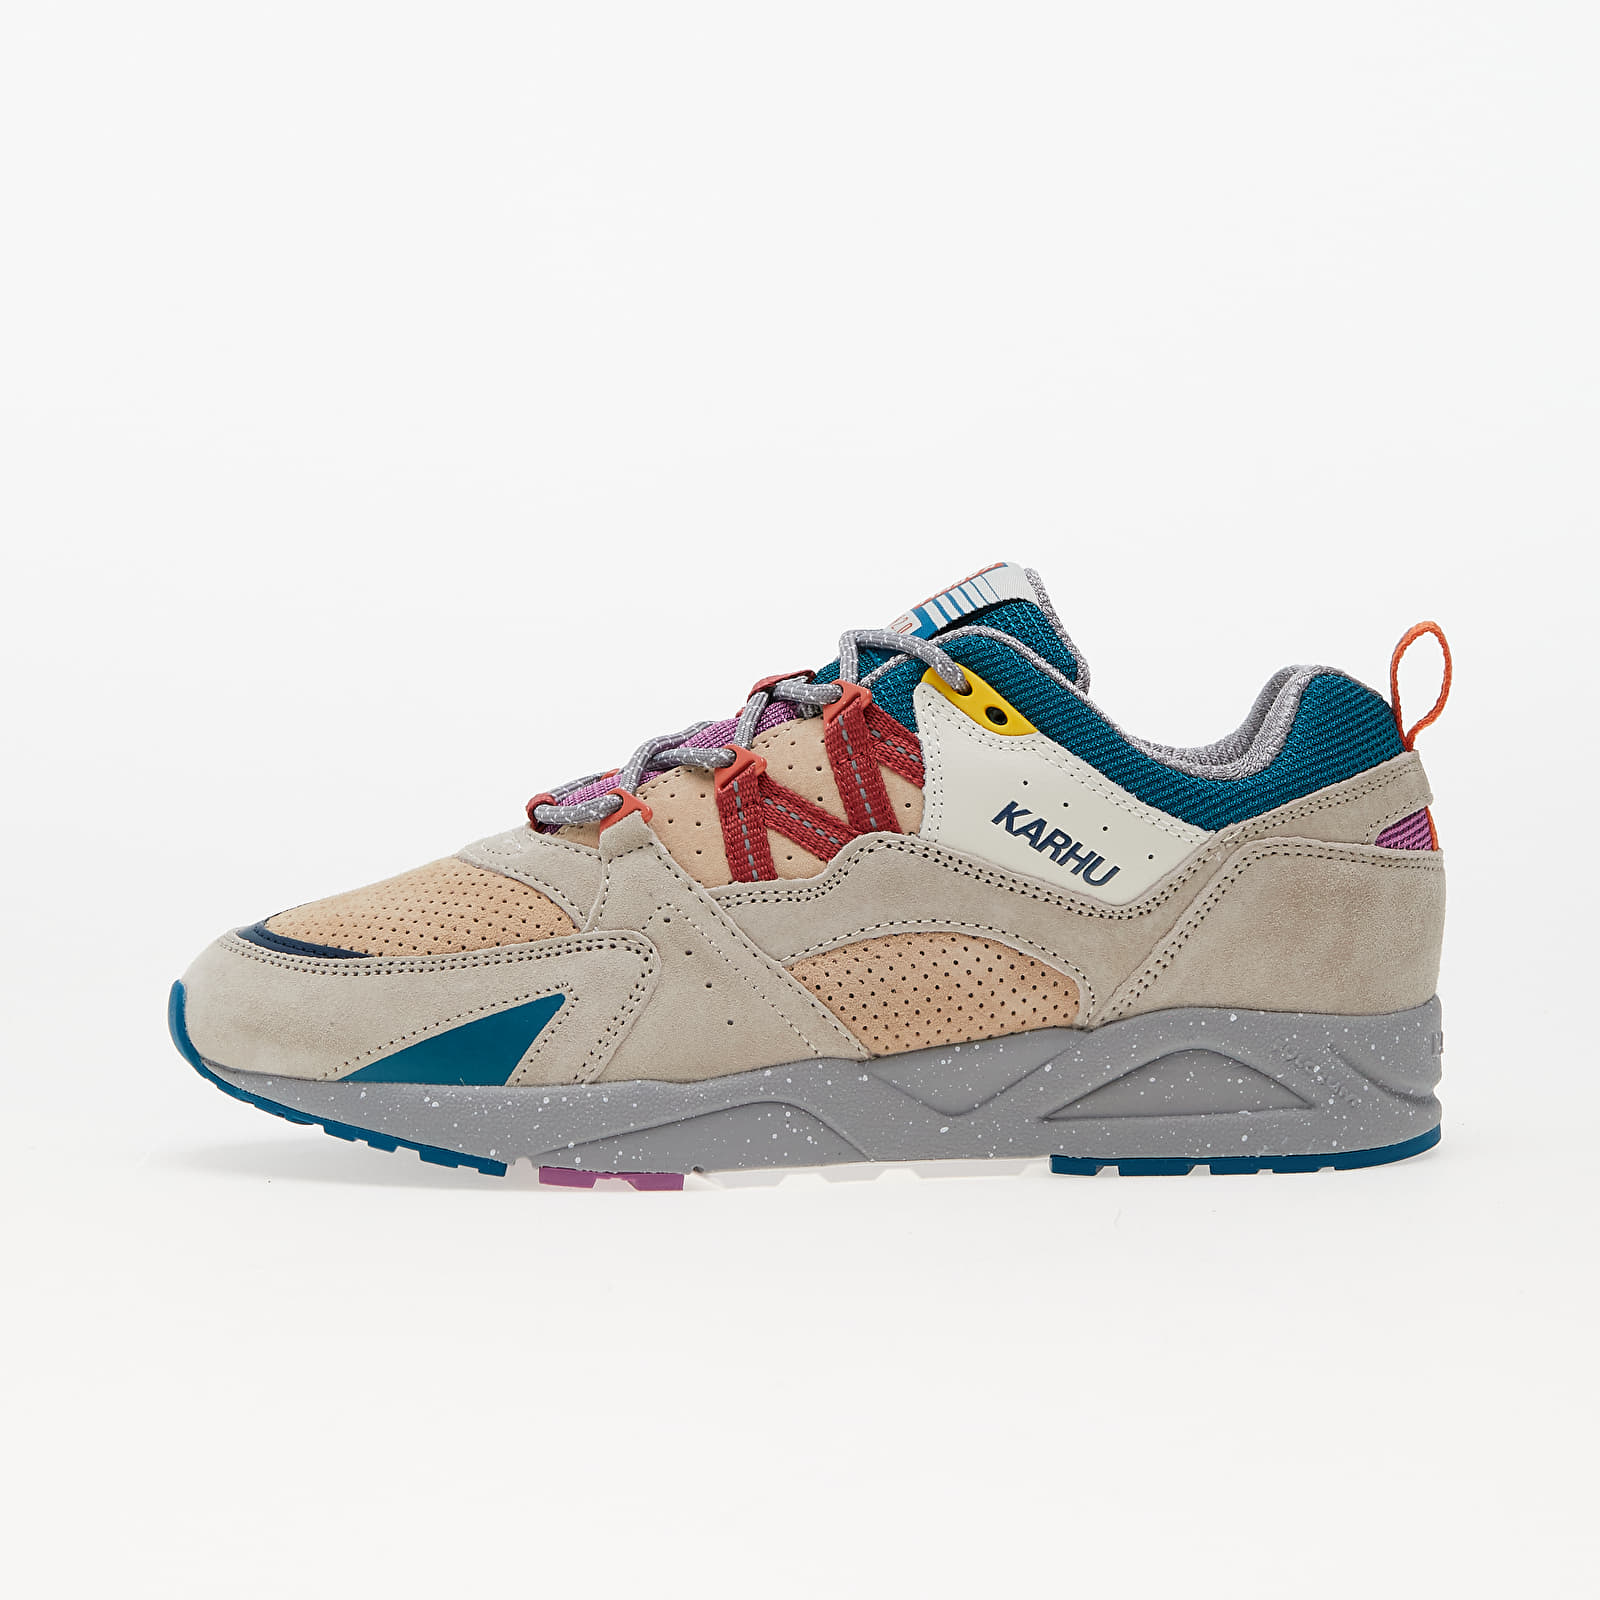 Herenschoenen Karhu Fusion 2.0 Silver Lining/ Mineral Red